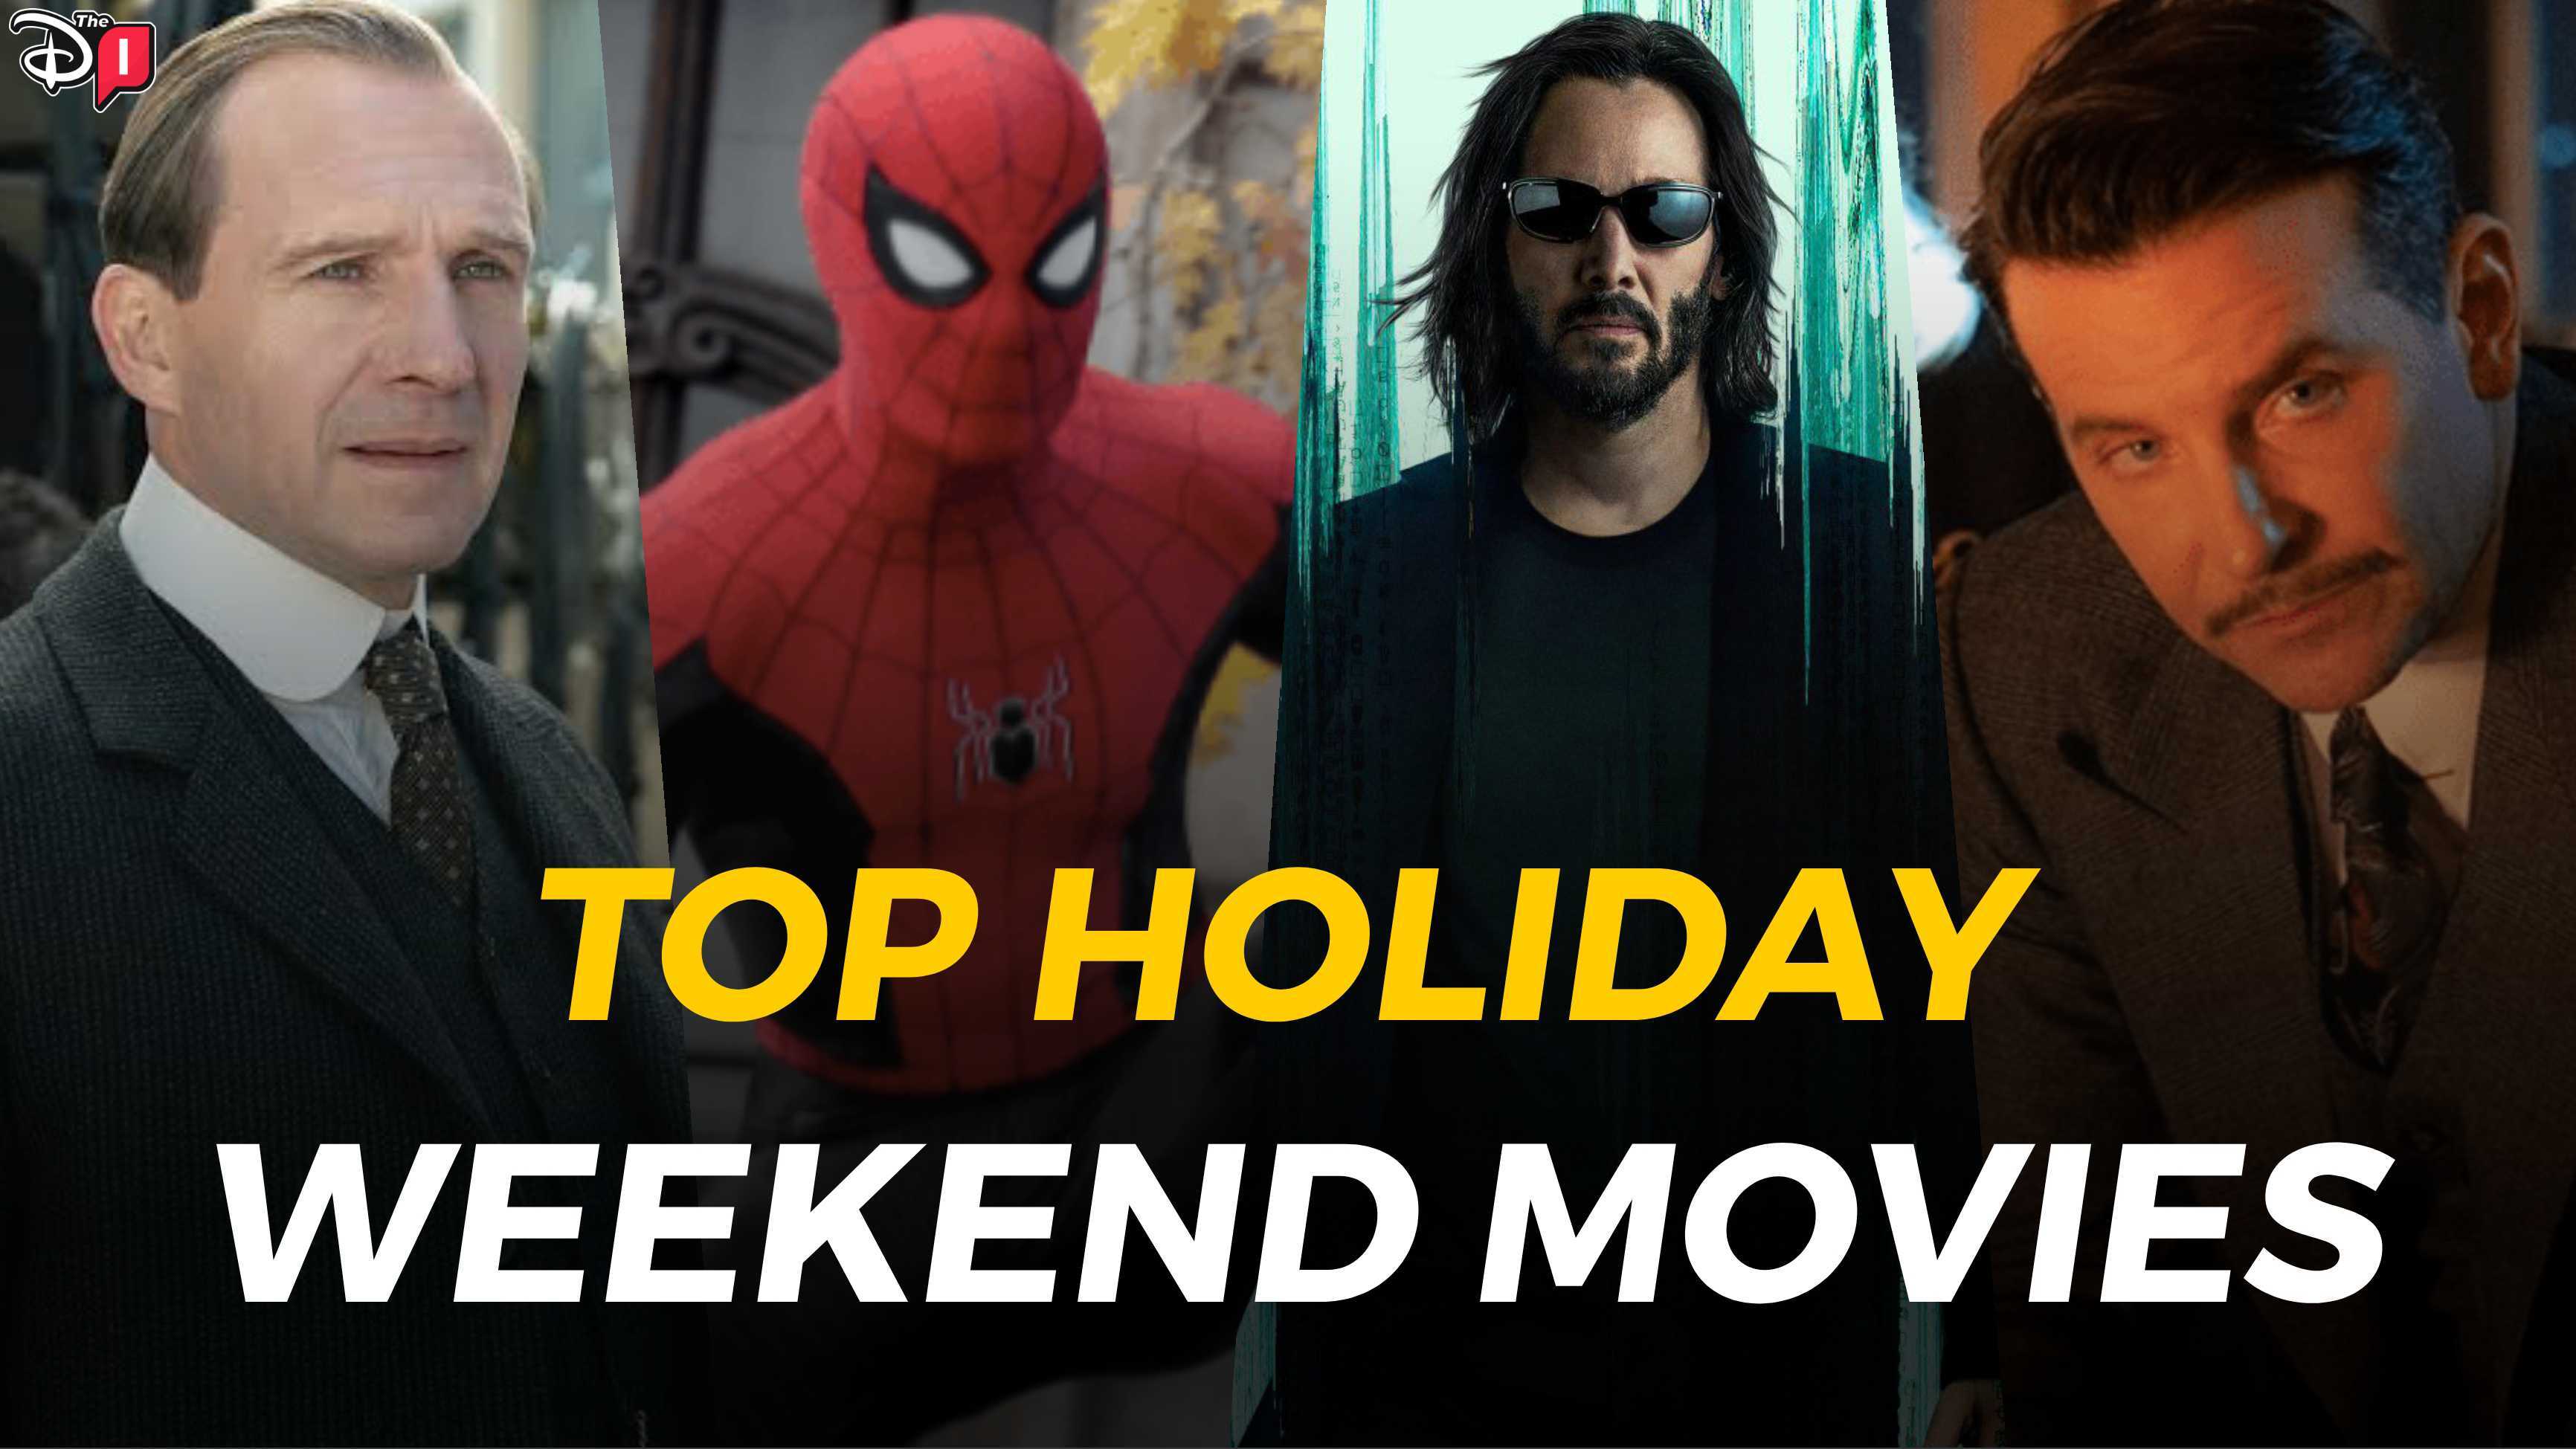 Top Holiday Weekend Movies: The King’s Man and the Rest